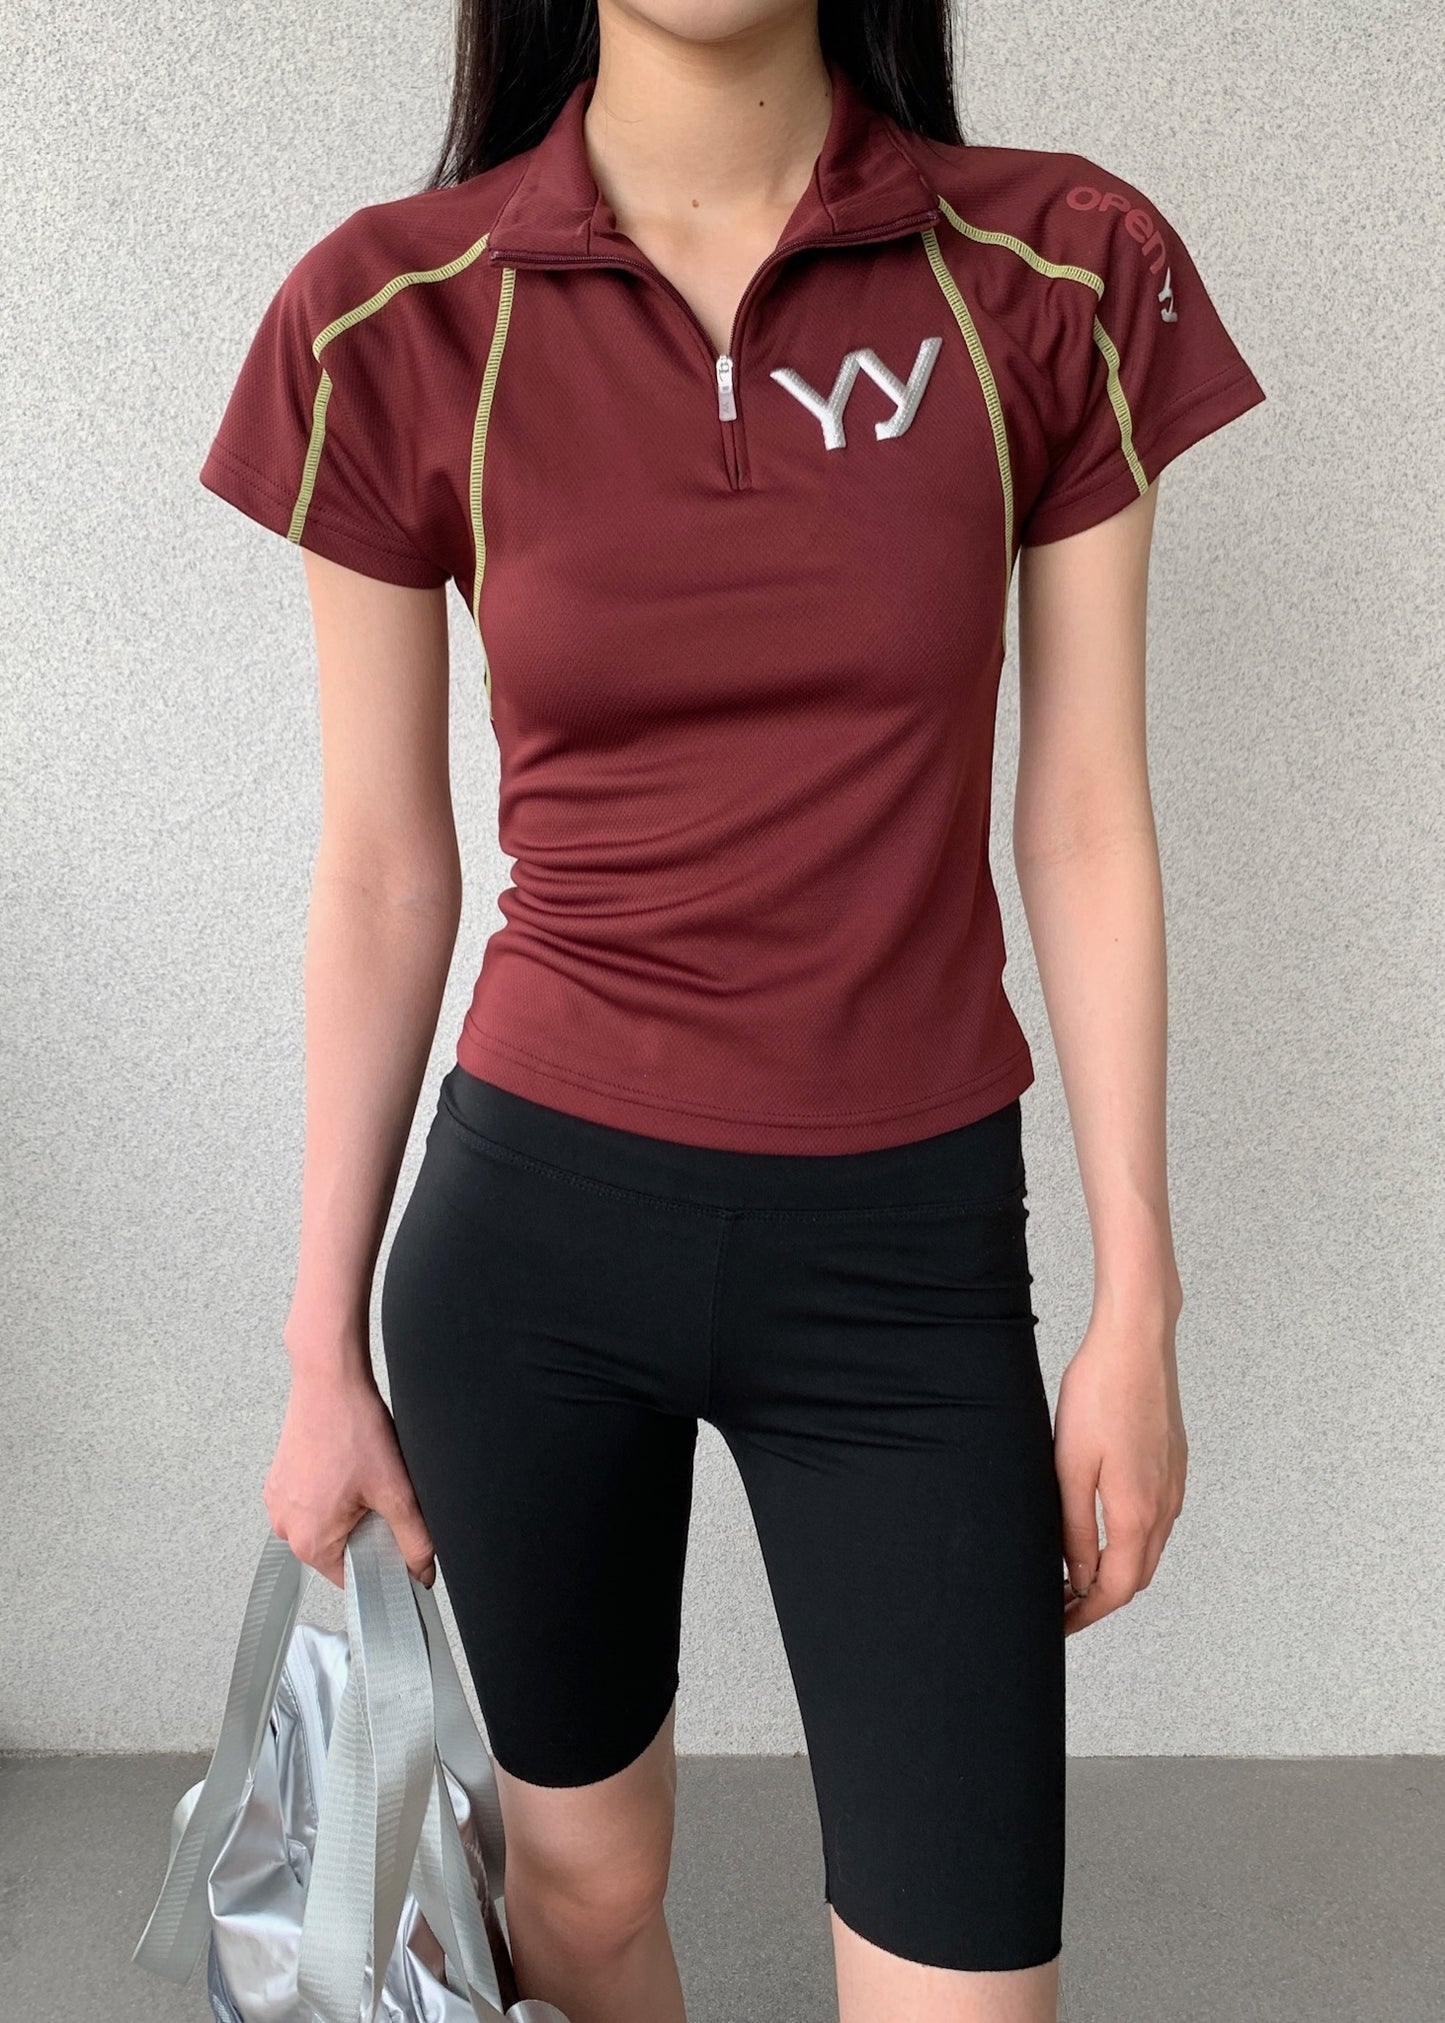 Cycling Jersey Top